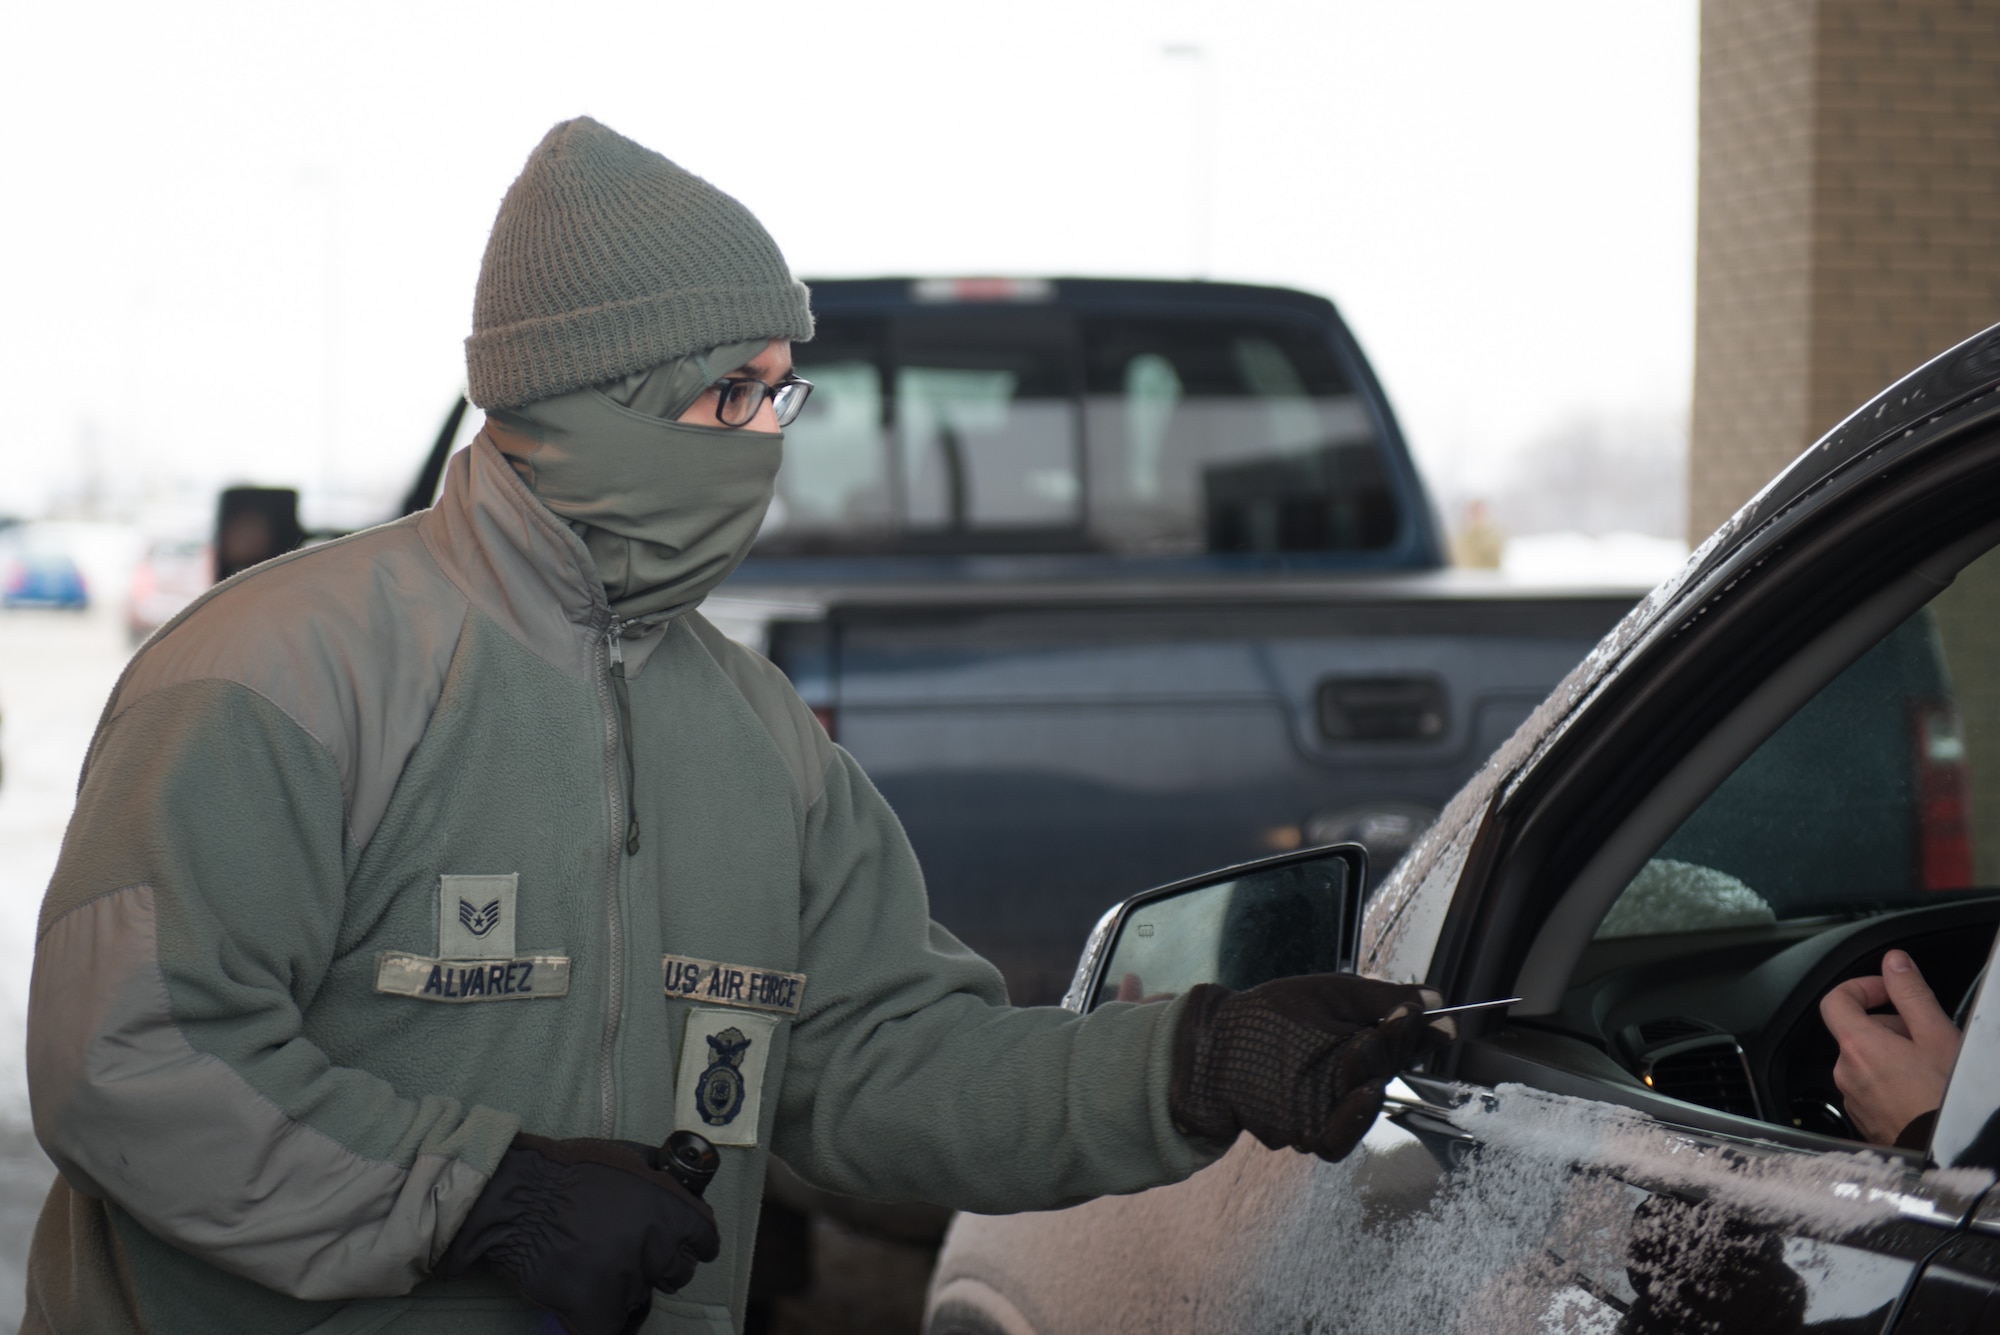 U.S. Air Force Staff Sgt. Xavier Alvarez, 55th Security Force Squadron, waves for a car to proceed at the U.S. Strategic Command gate March 7, 2019, on Offutt Air Force Base. He is one of nearly a dozen guards working the gate in subfreezing temperatures. (U.S. Air Force photo by Tech. Sgt. Rachelle Blake)